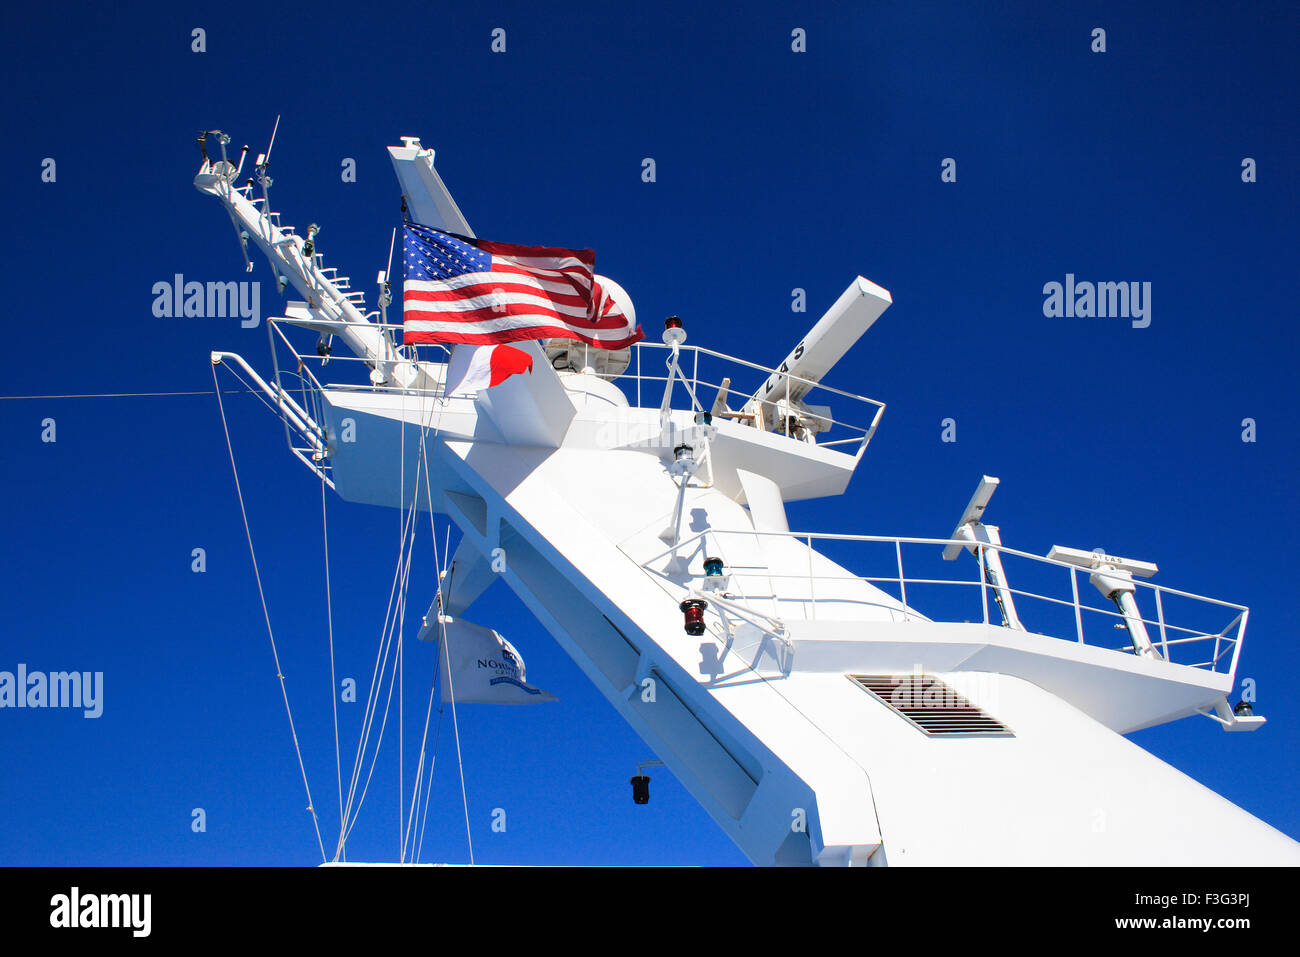 U.S.A. flag over cruise ship telecommunication systems ; New Orleans ; Louisiana ; U.S.A. United States of America Stock Photo